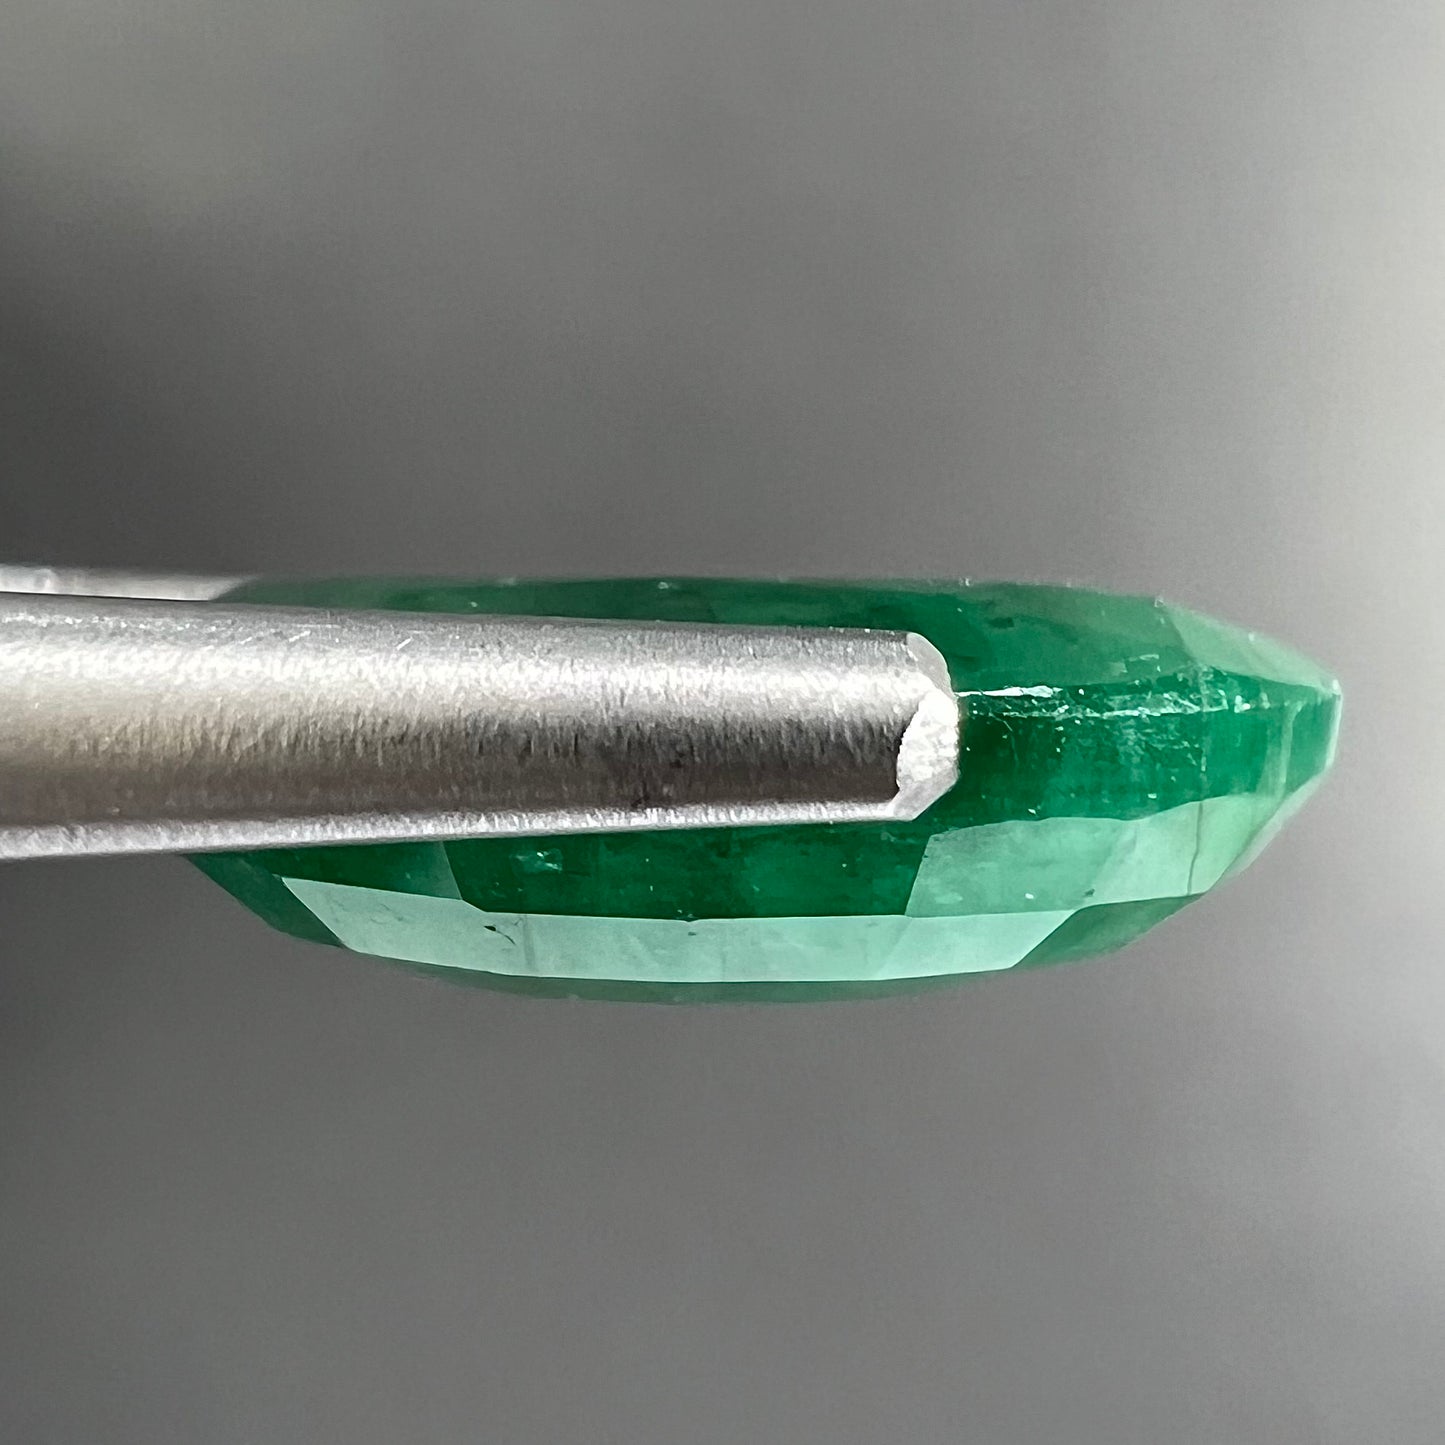 A loose, faceted oval cut commercial grade emerald stone.